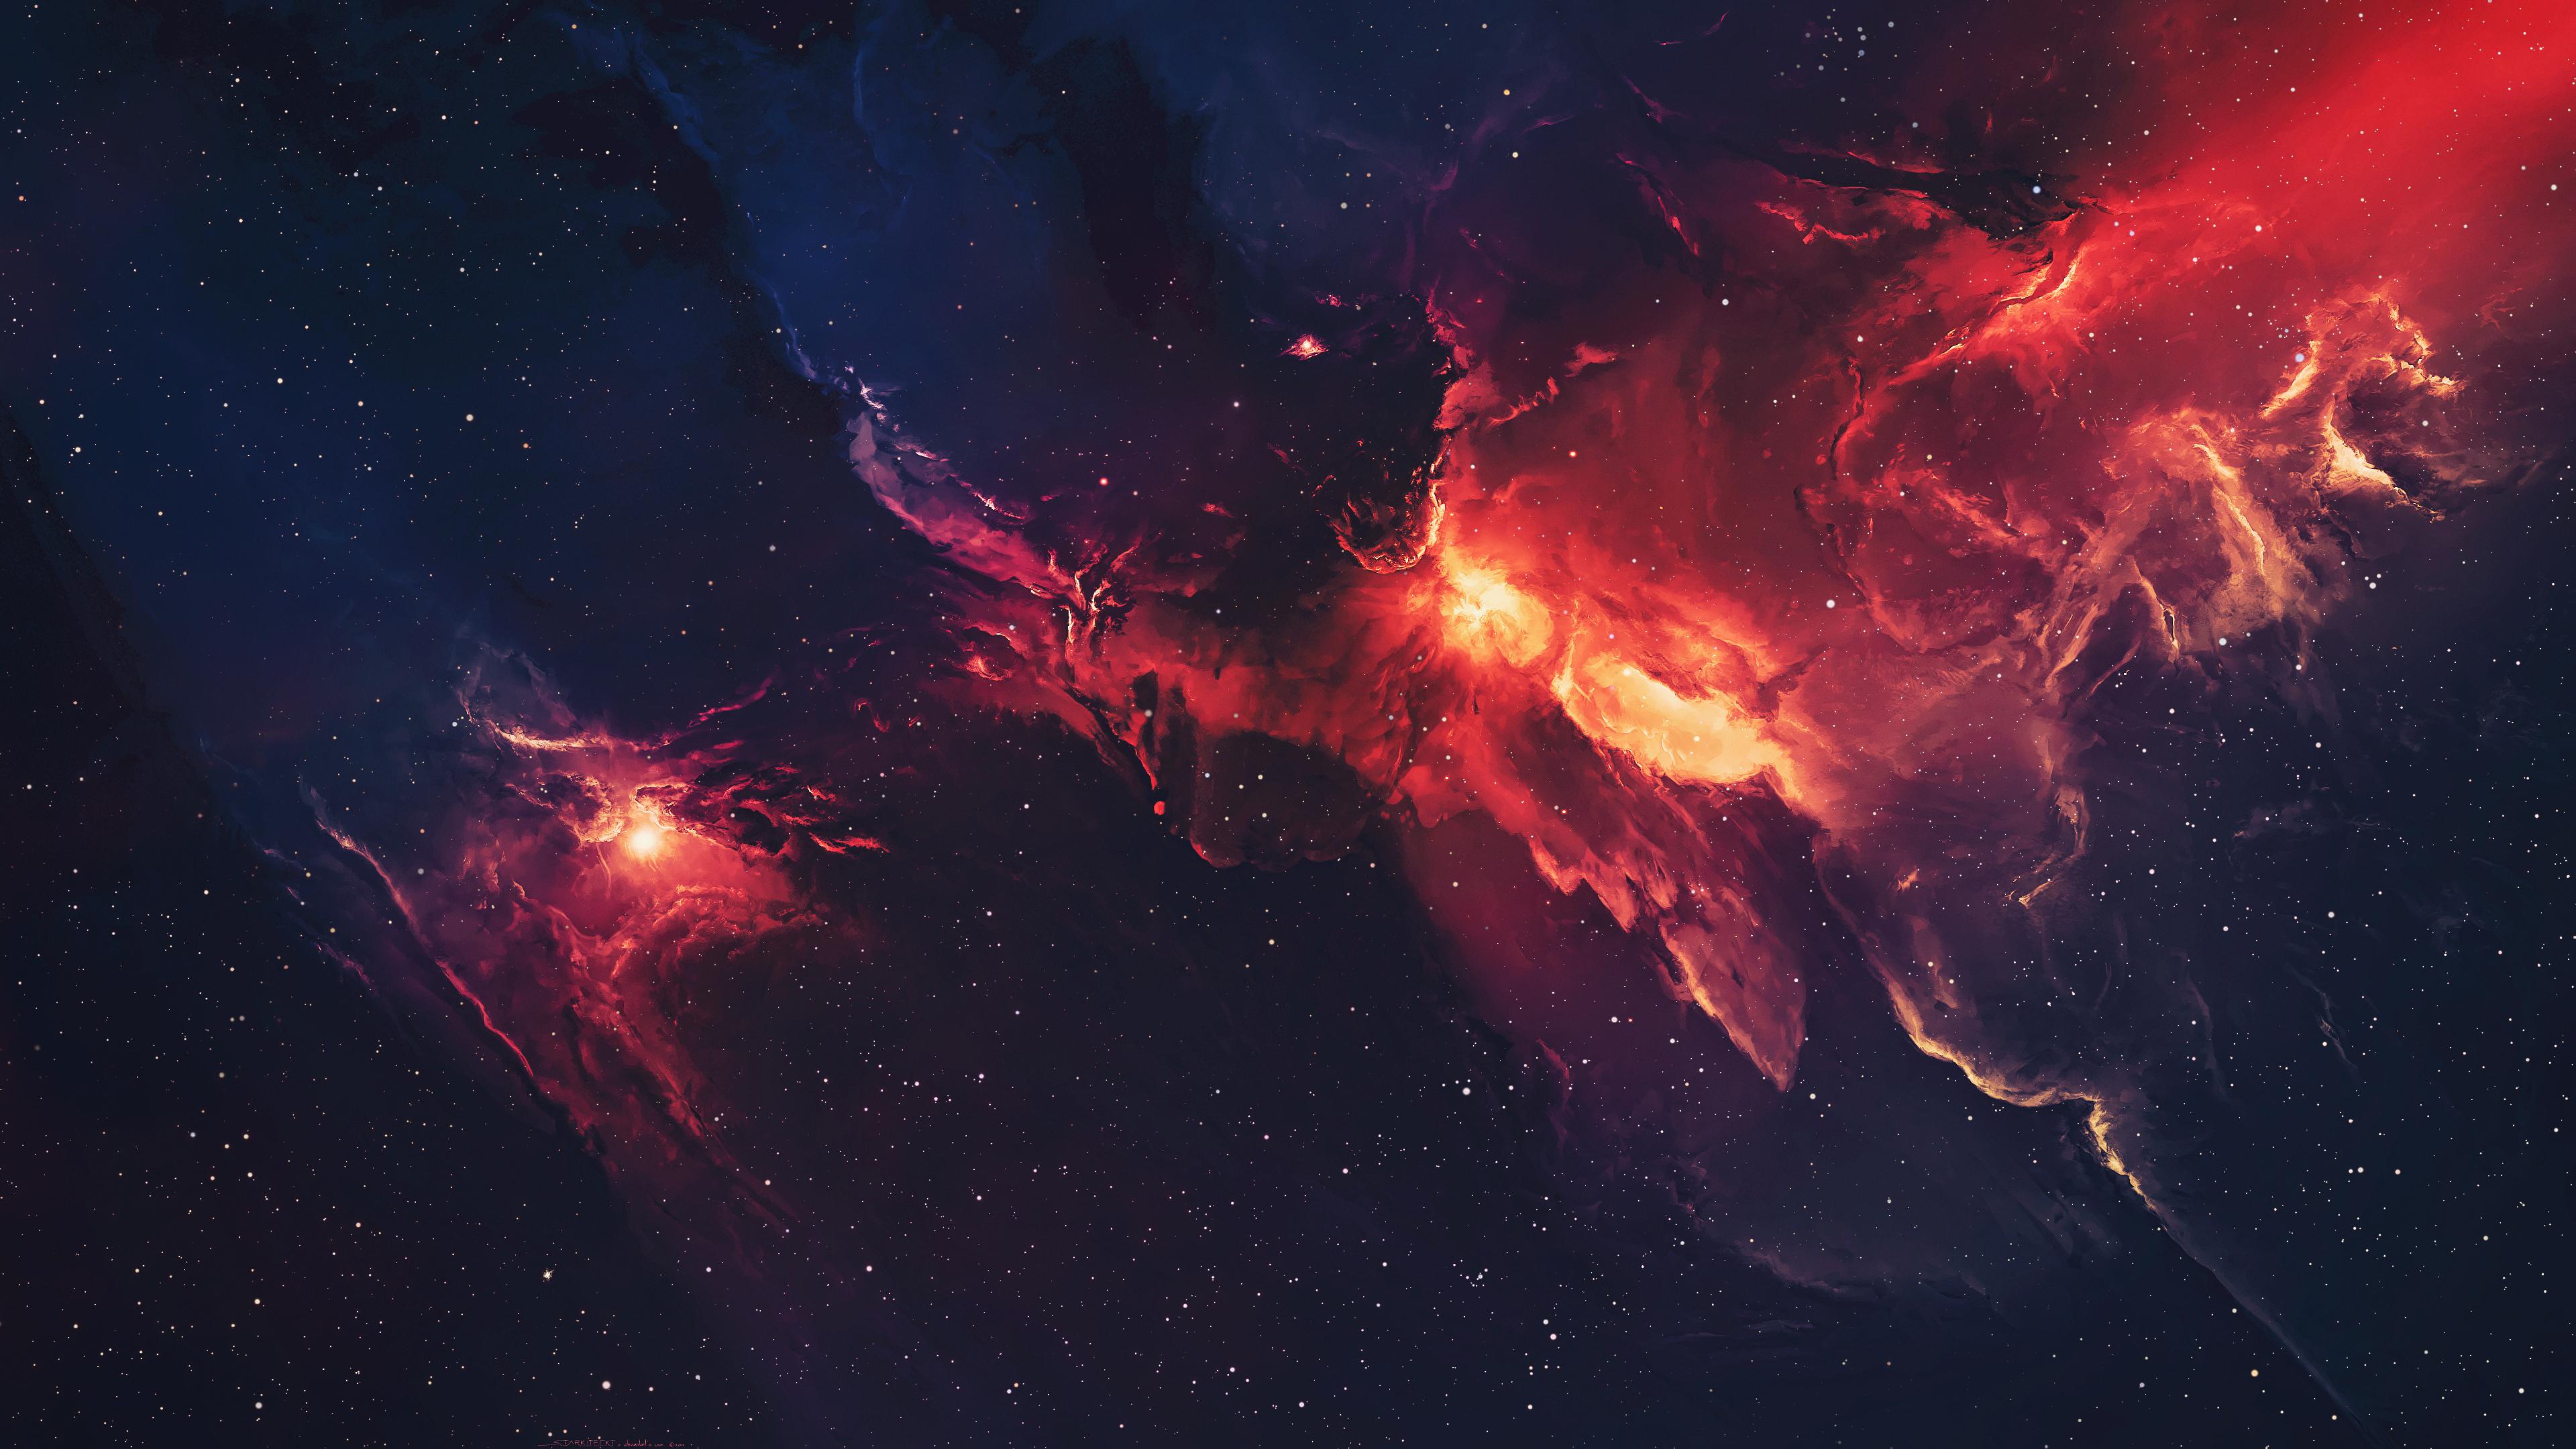 Nebula 4K wallpaper for your desktop or mobile screen free and easy to download